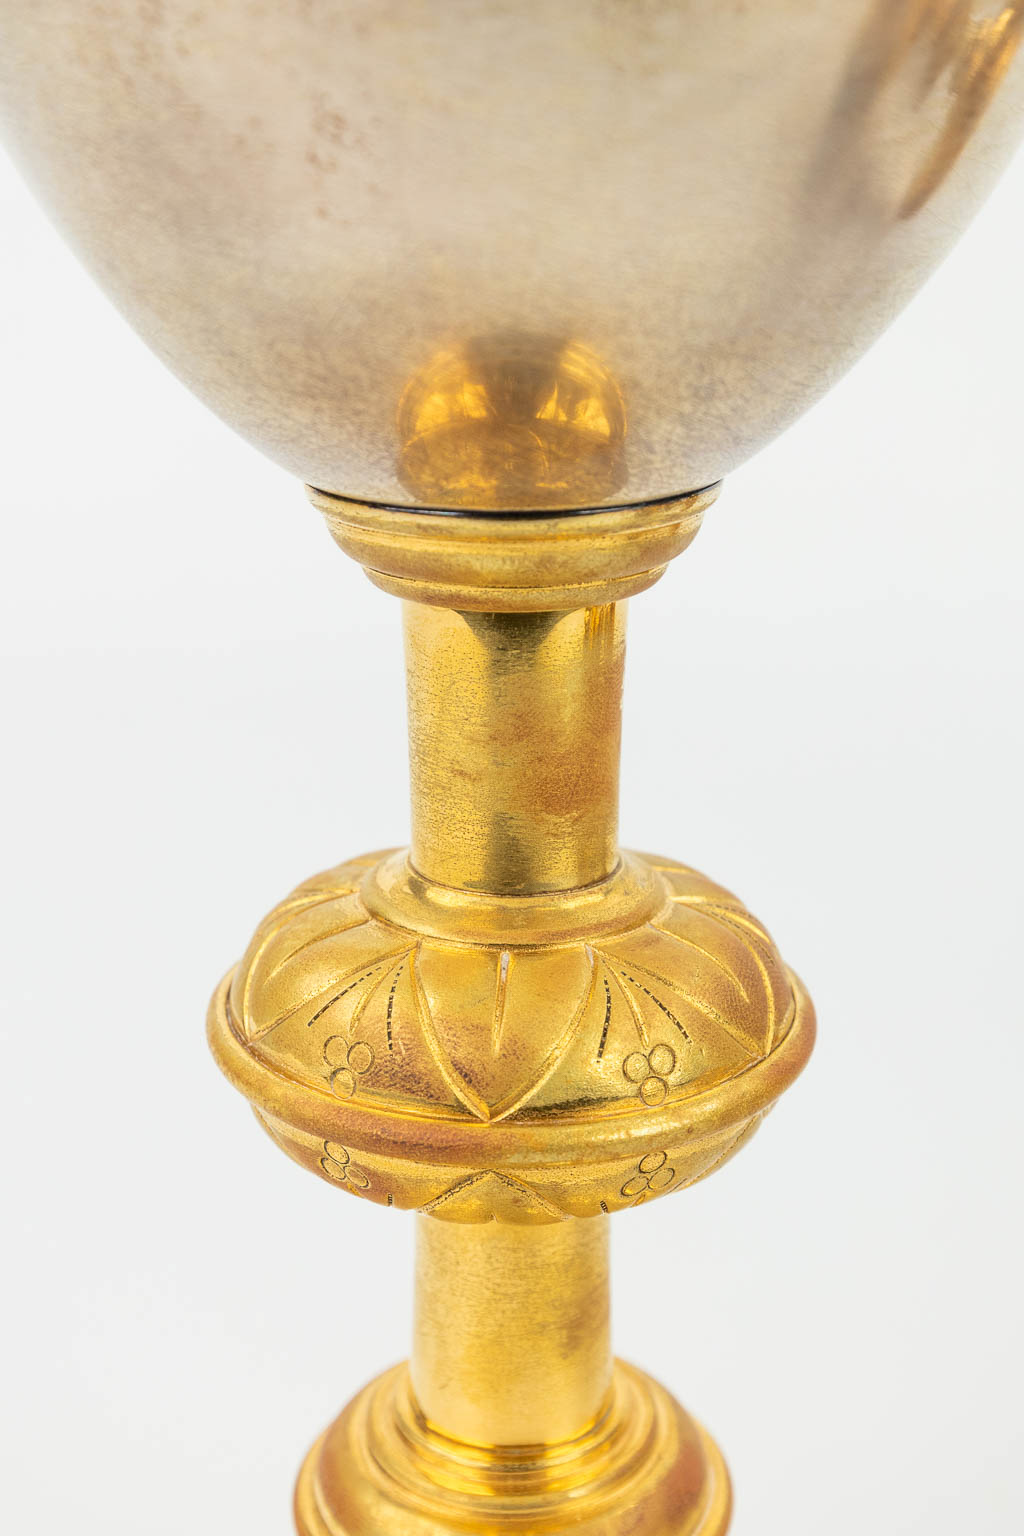 A collection of 4 large ciboria and a chalice made of silver and gold plated metal. 